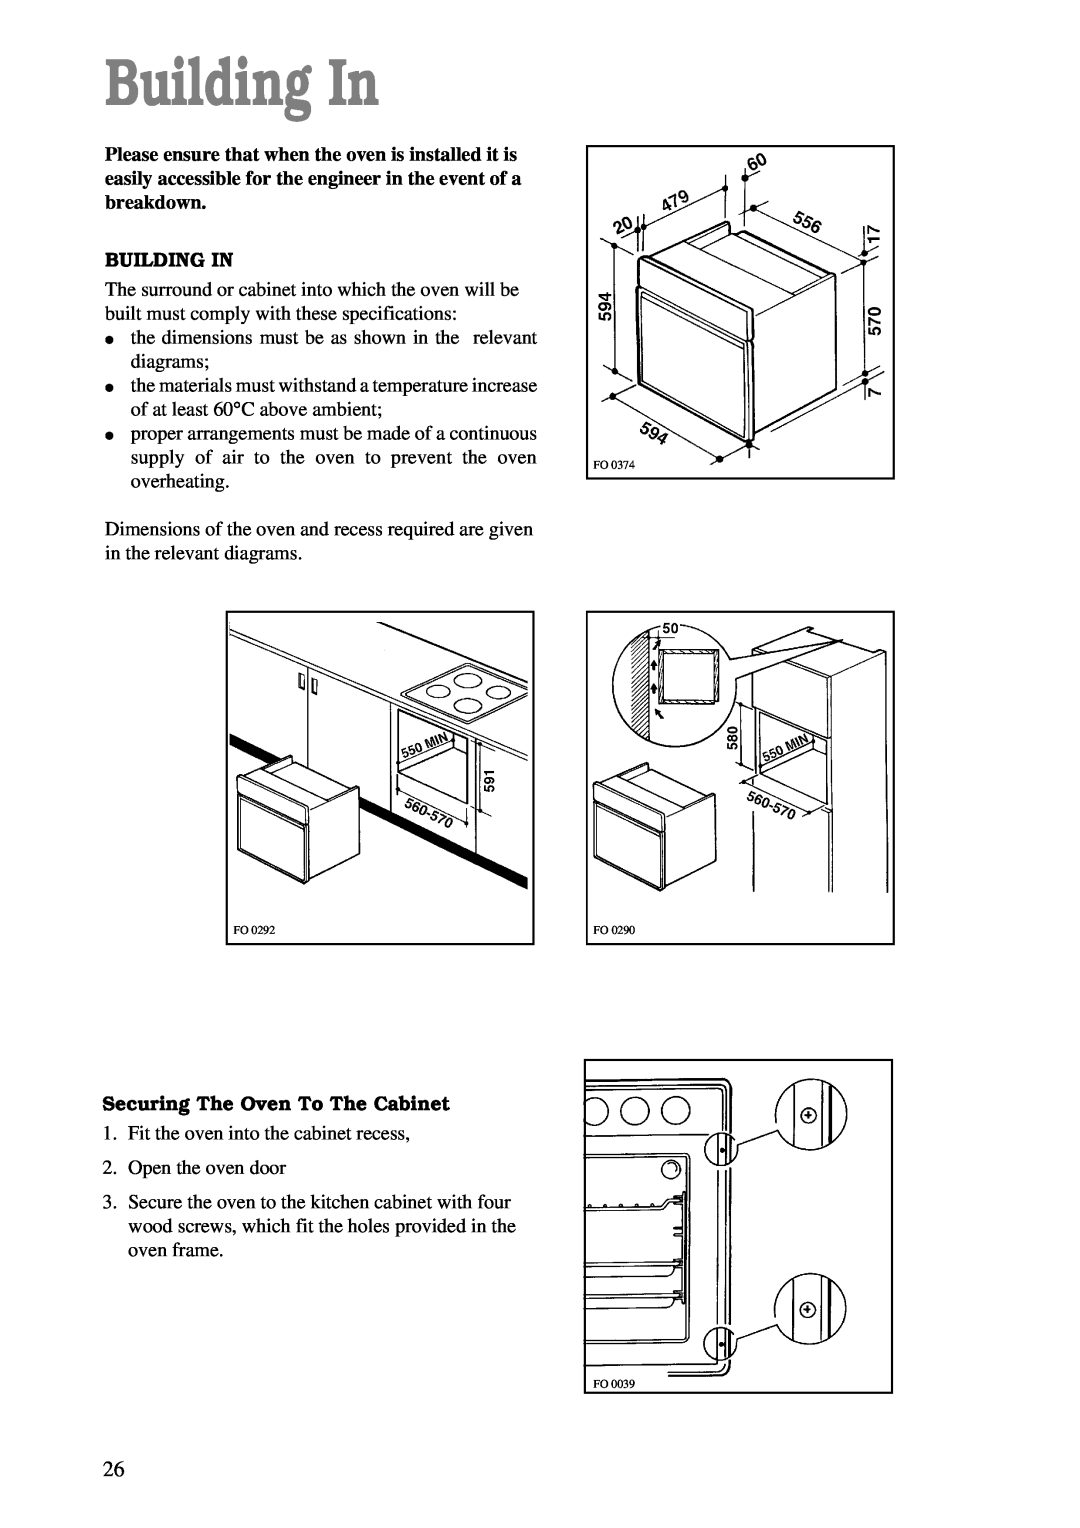 Tricity Bendix TBS 605 manual Building In, Securing The Oven To The Cabinet 